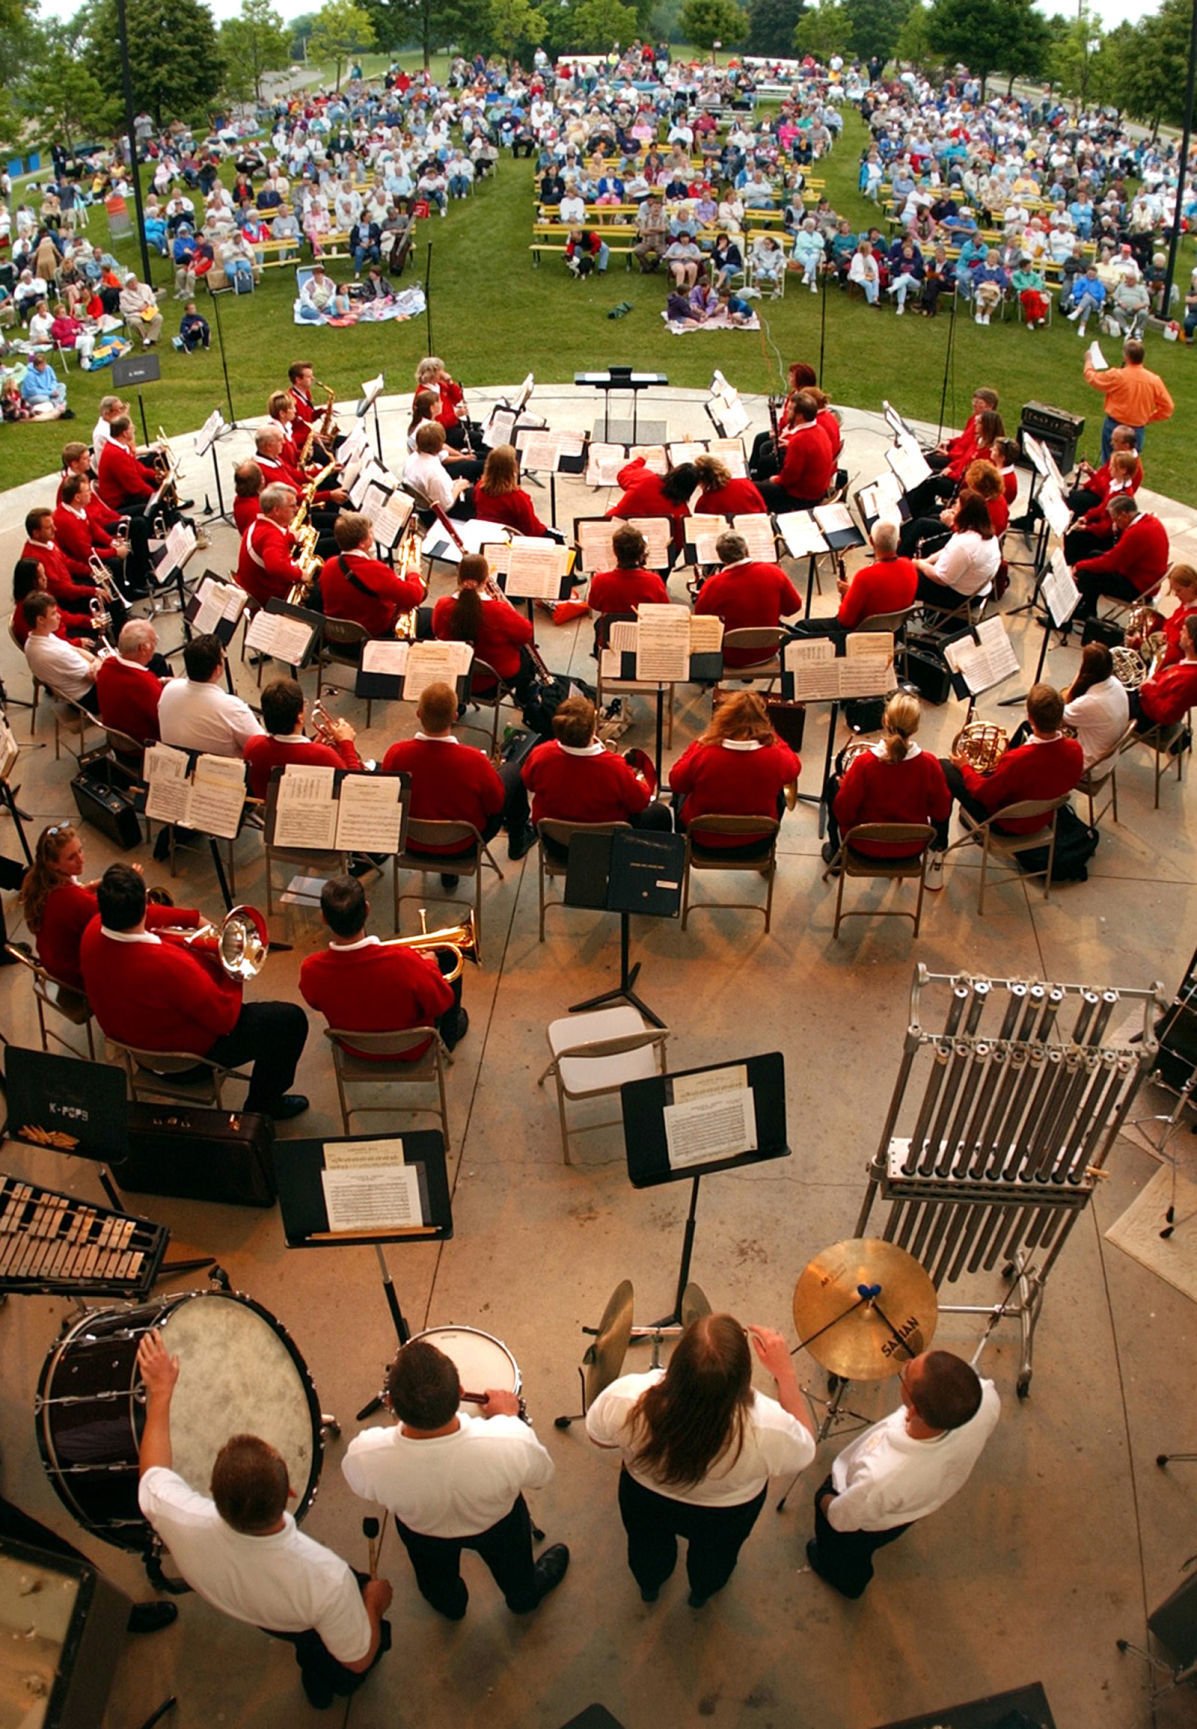 Kenosha Pops Concert Band wrapping up its 2018 season with a night of